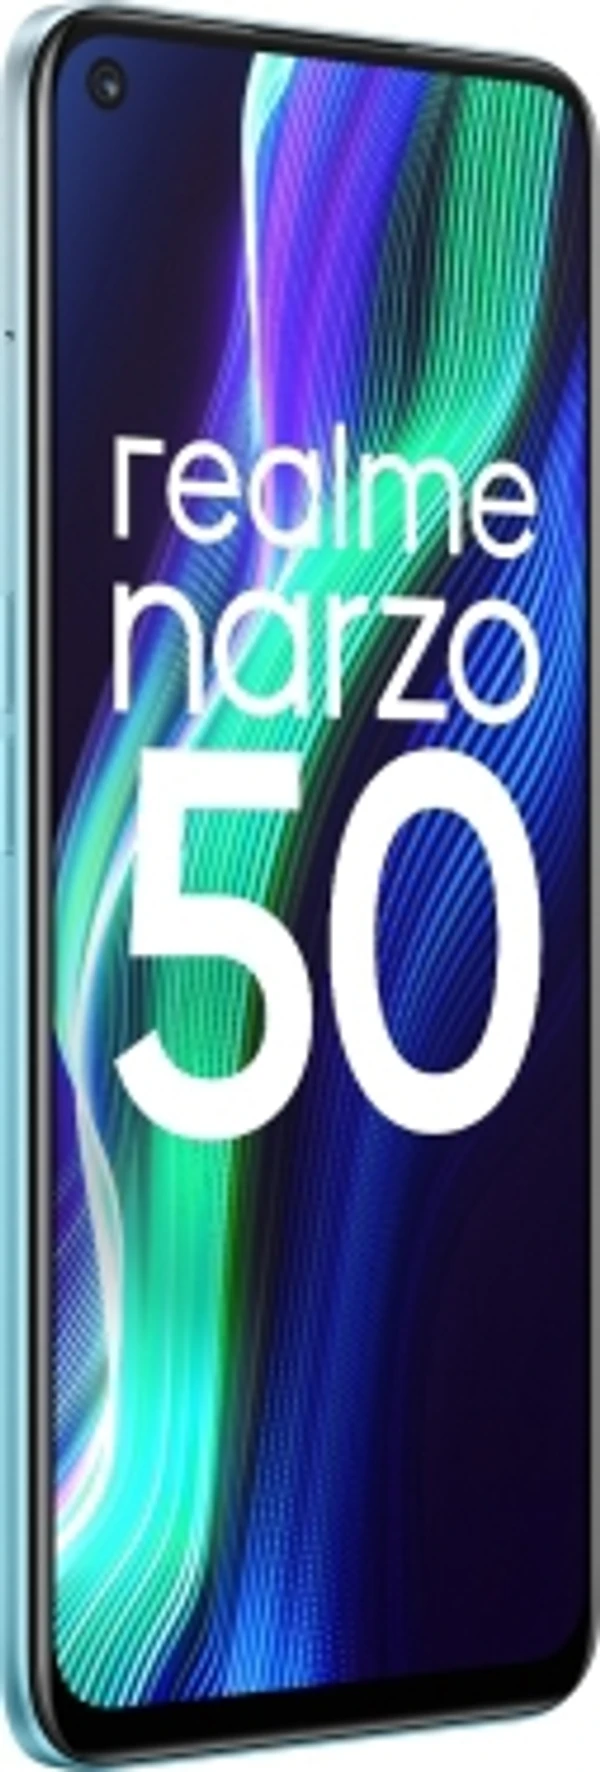 realme Narzo 50 (Speed Blue, 128 GB)In The Box :Handset, Adapter, USB Cable, Sim Card Tool, Screen Protect Film, TPU Case, Important Info Booklet with Warranty Card, Quick GuideModel Number :RMX3286Model Name :Narzo 50Color :Speed BlueBrowse Type :SmartphonesSIM Type :Dual SimHybrid Sim Slot :No7 Days Replacement Policy, No questions asked.Hurry, Only 2 left!